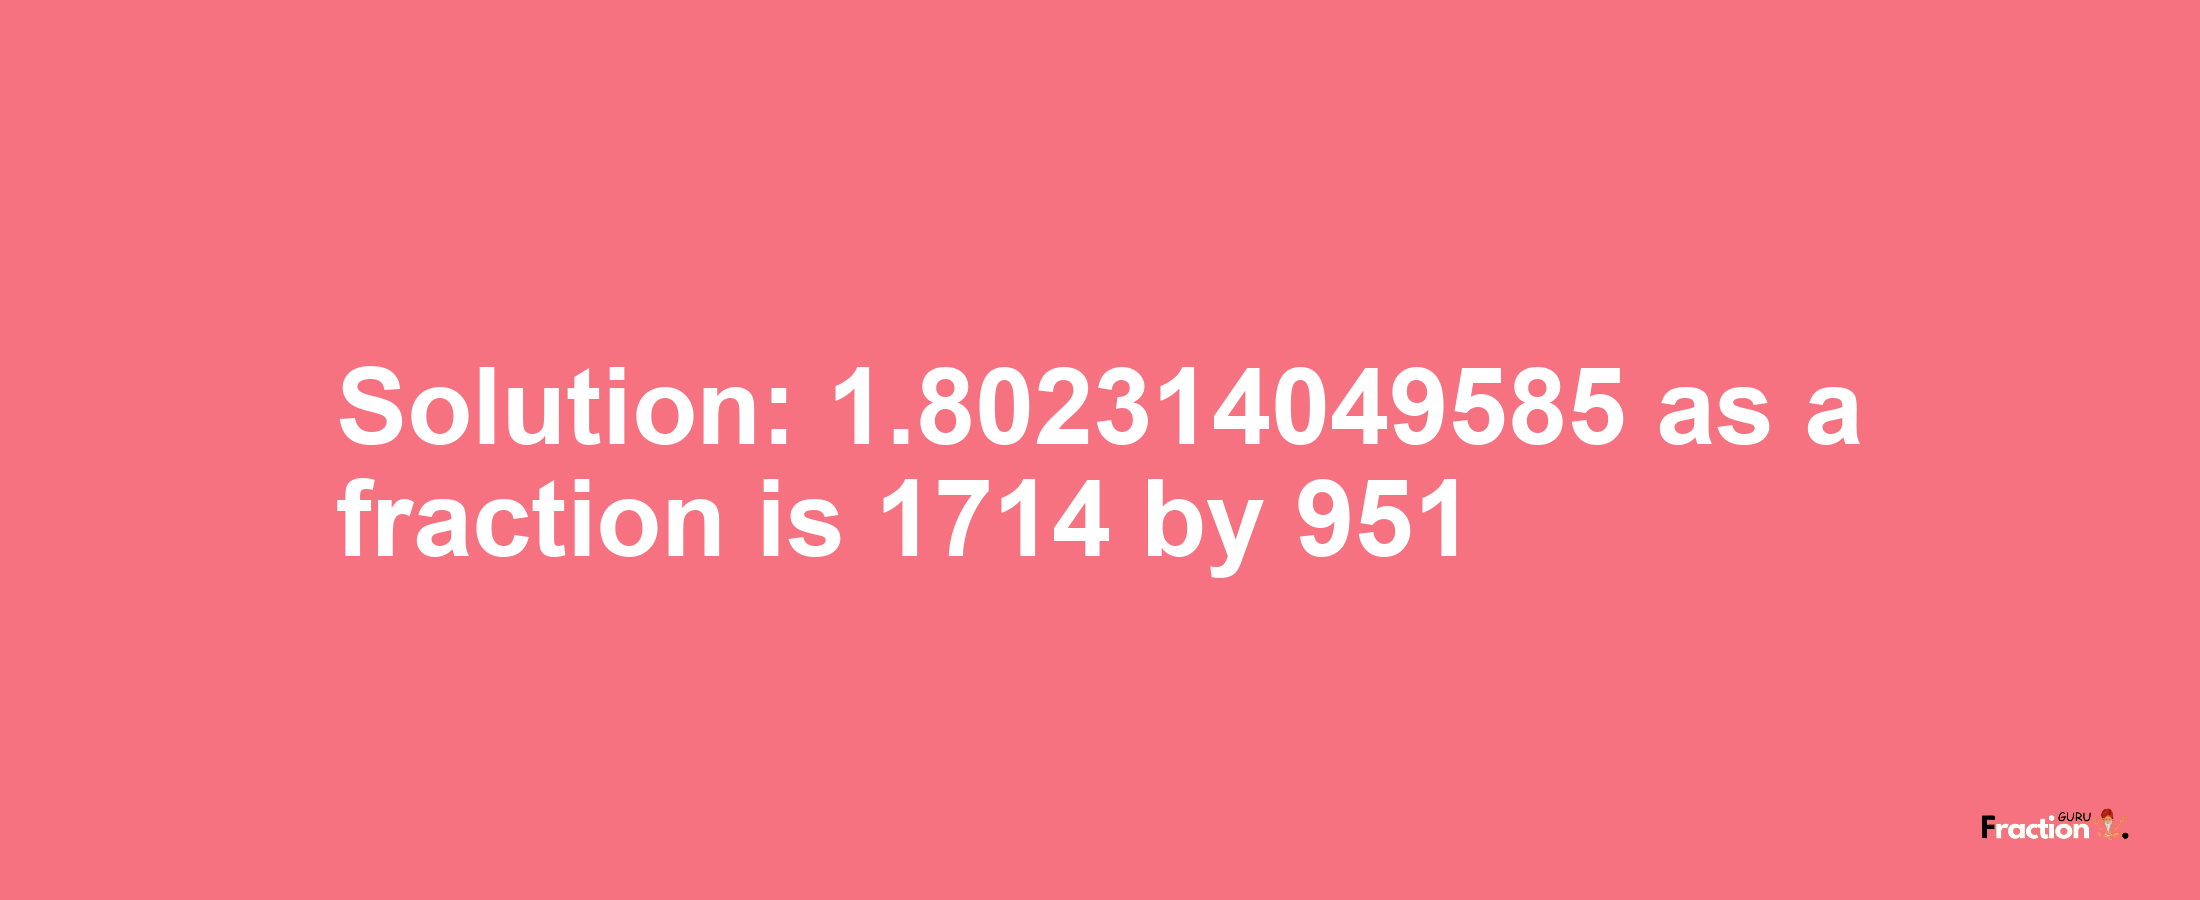 Solution:1.802314049585 as a fraction is 1714/951